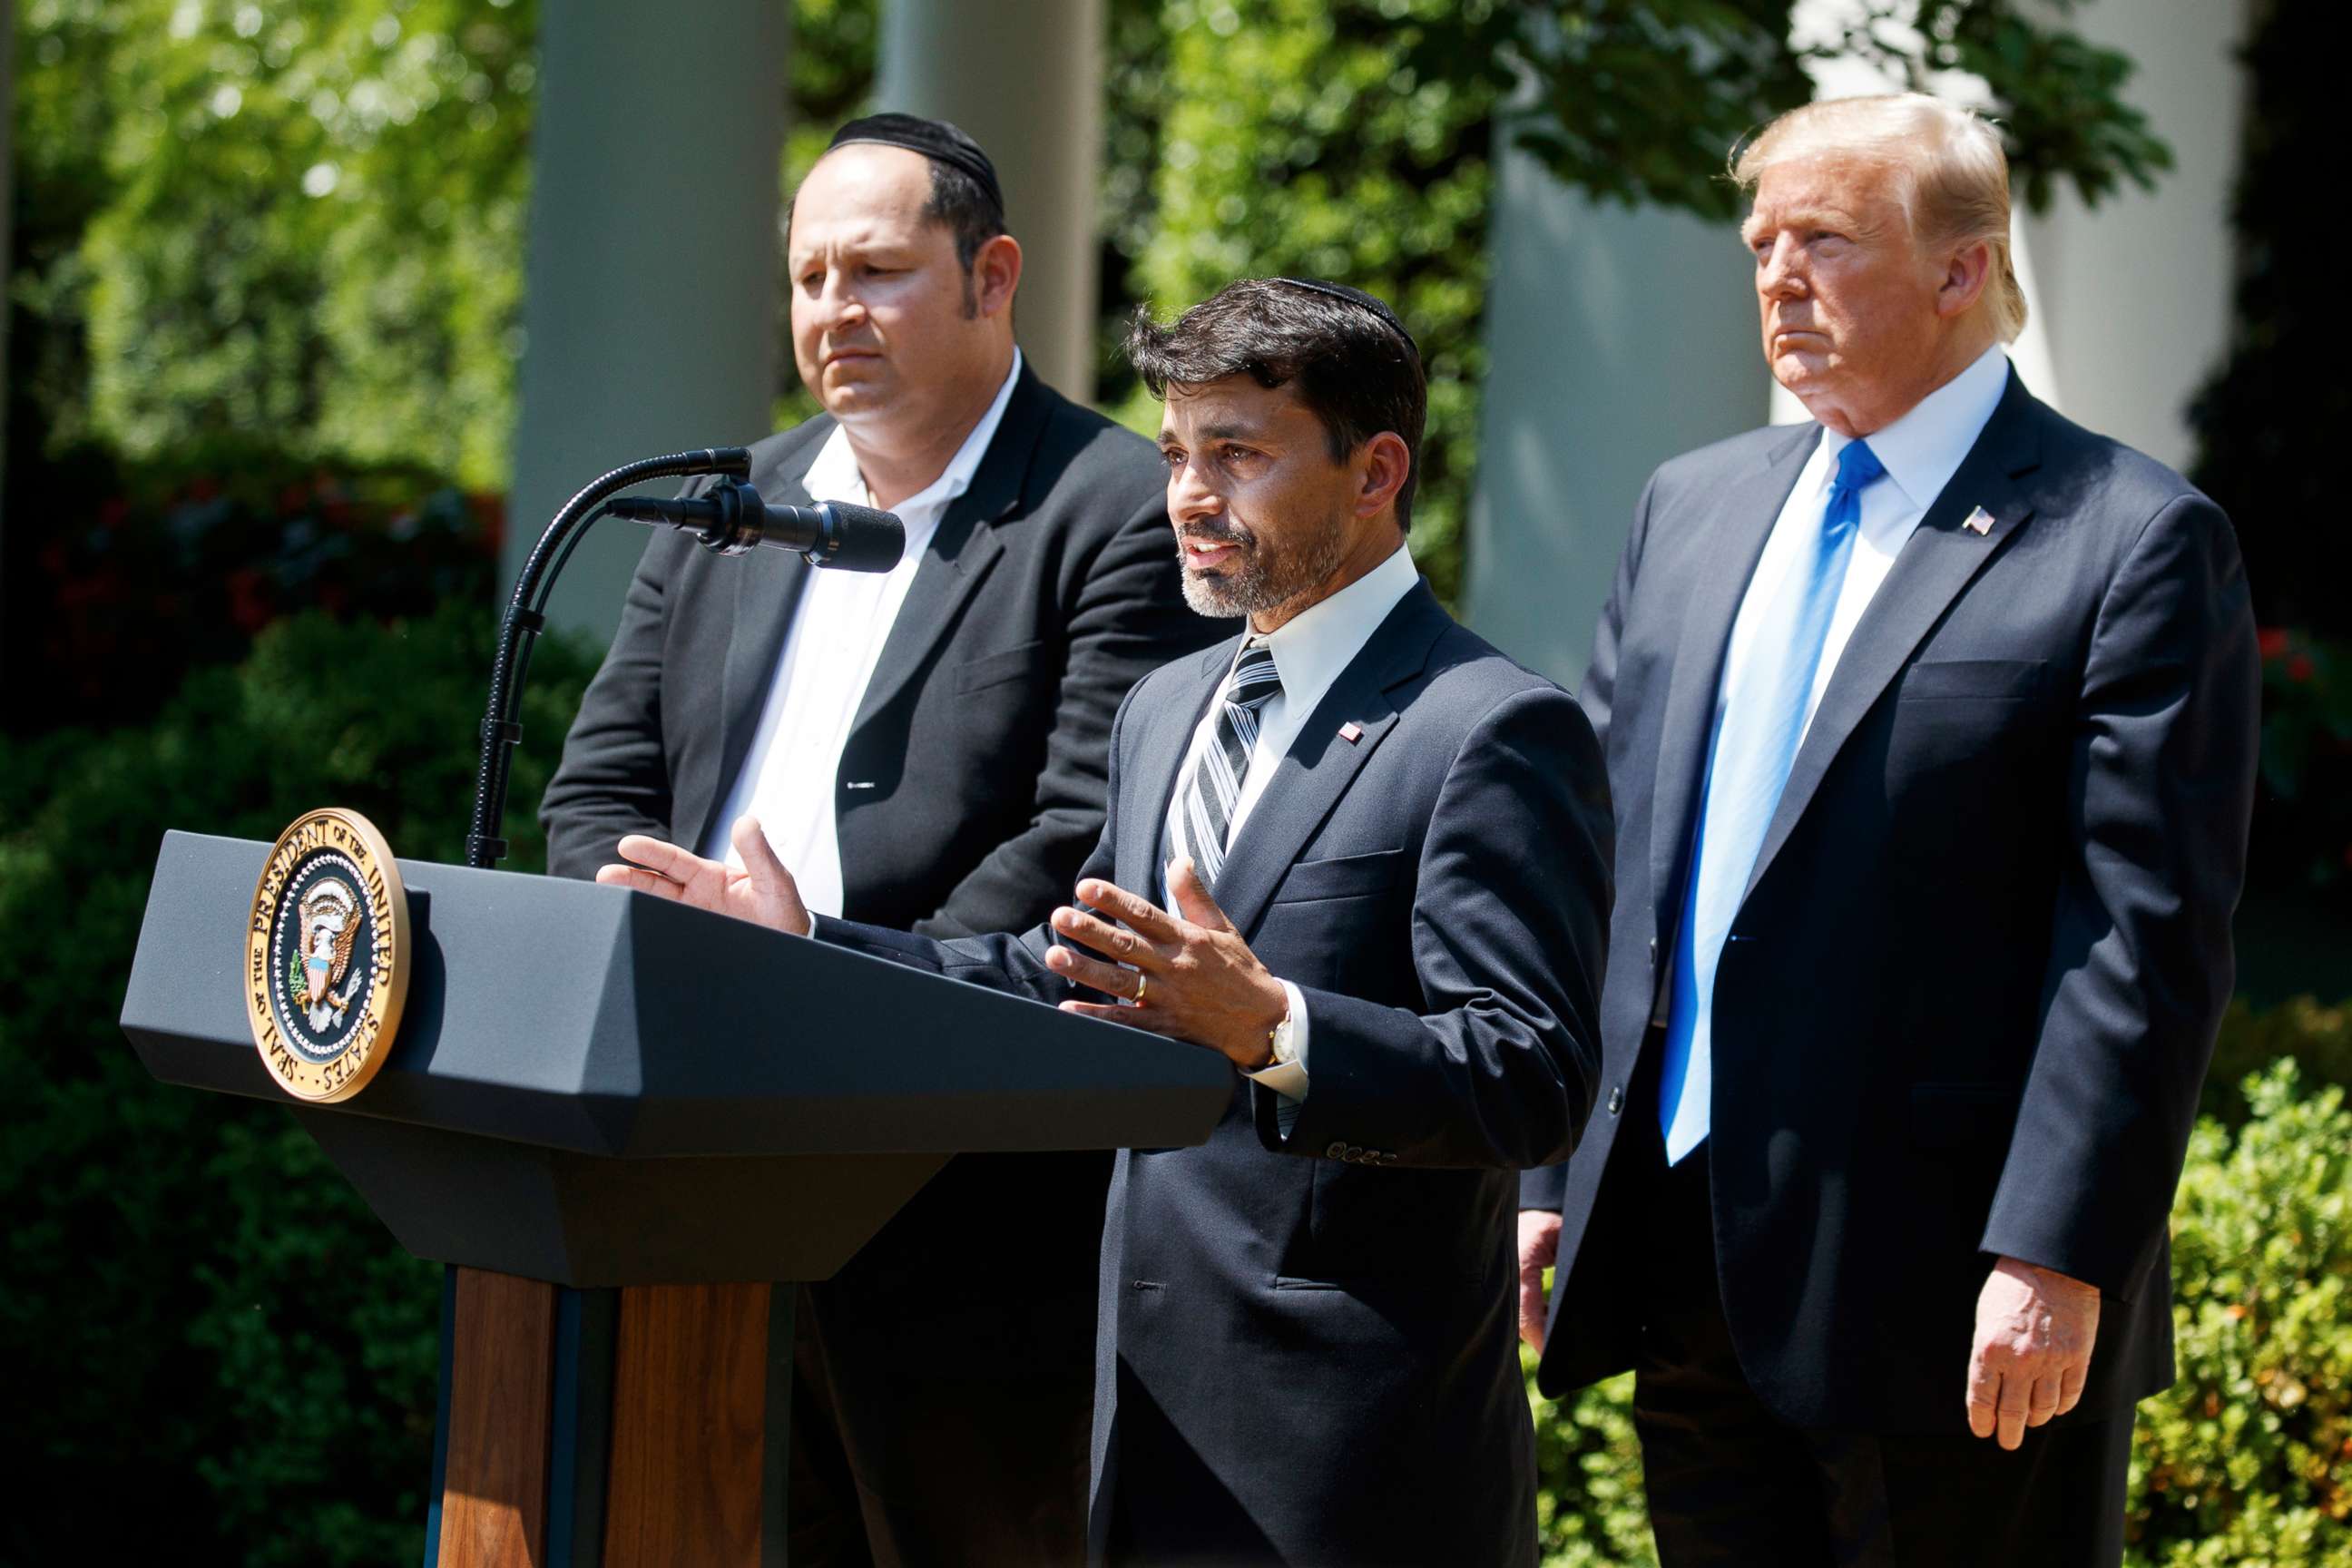 PHOTO: Jonathan Morales, left, and President Donald Trump, look on as Oscar Stewart speaks during a National Day of Prayer event in the Rose Garden of the White House, Thursday, May 2, 2019, in Washington.